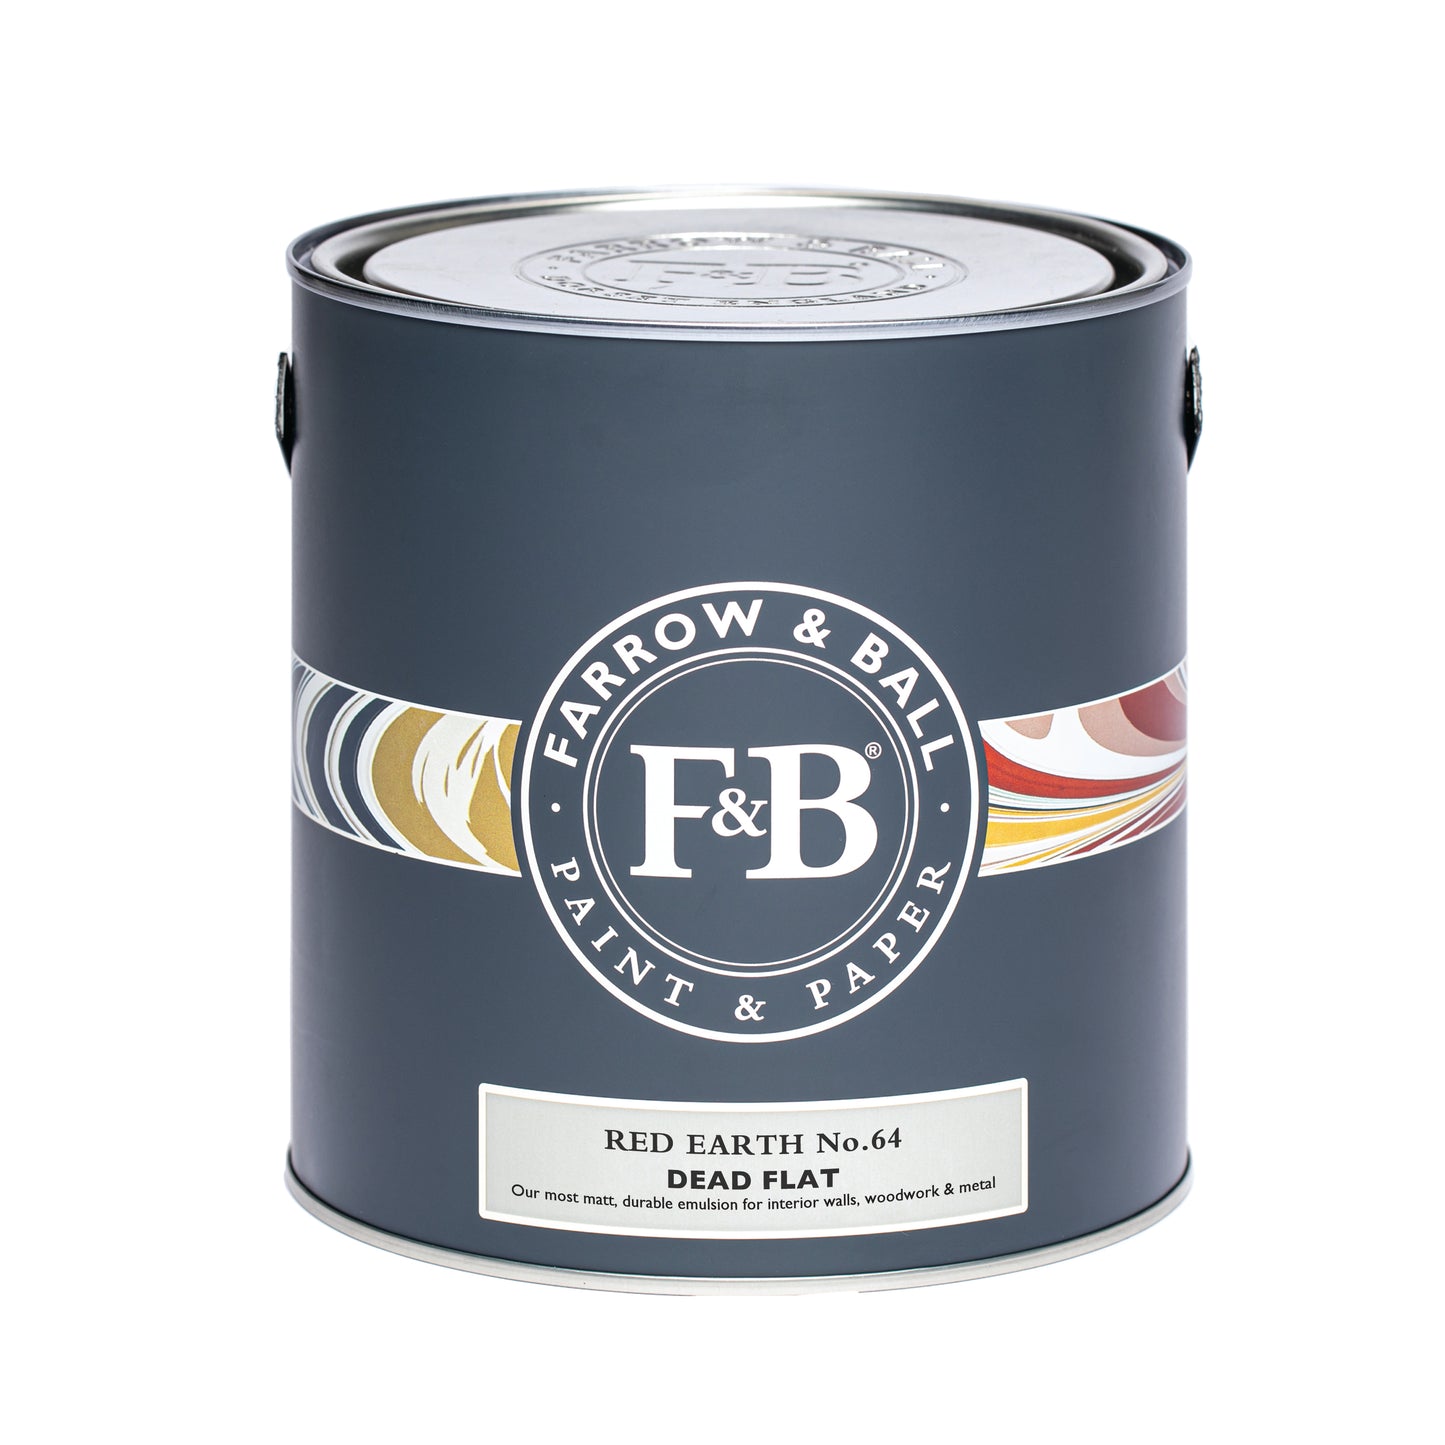 Red Earth 64 - Farrow and Ball - New Dead Flat